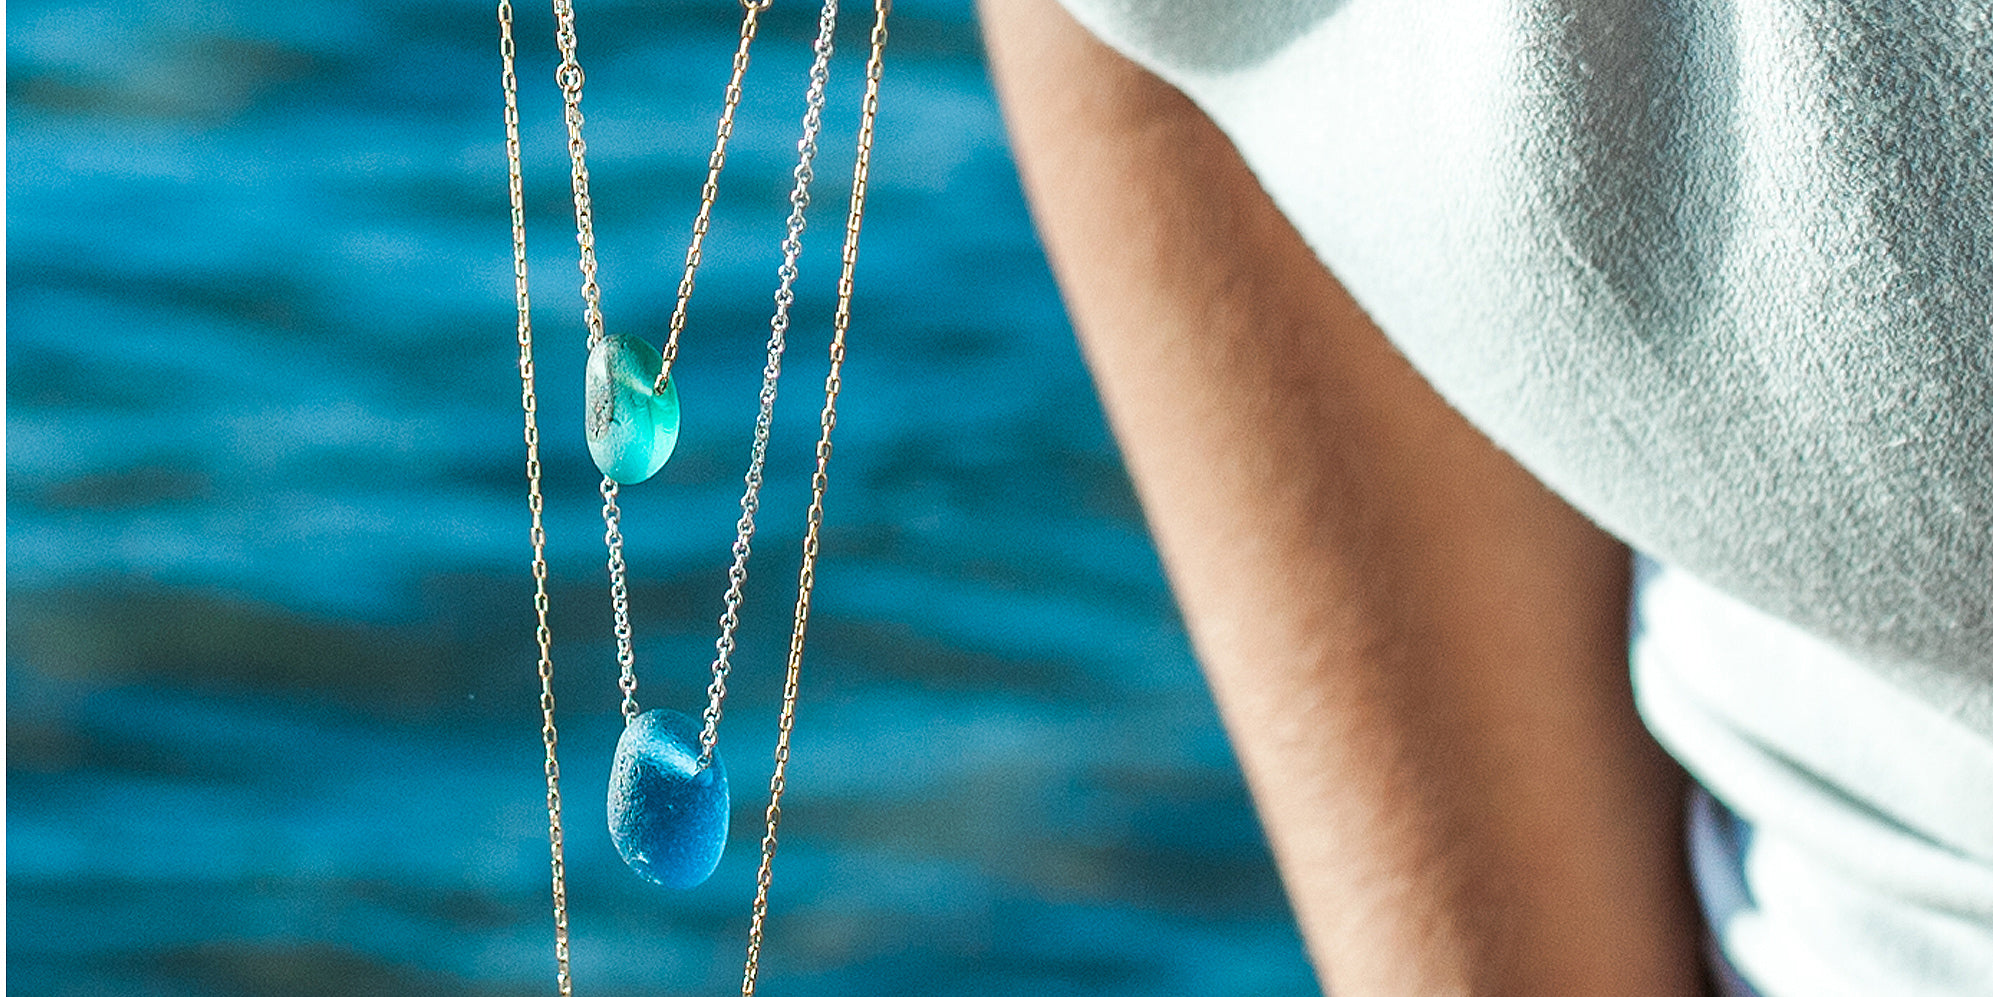 Our Seaglass Jewellery - Inspired by the Ocean